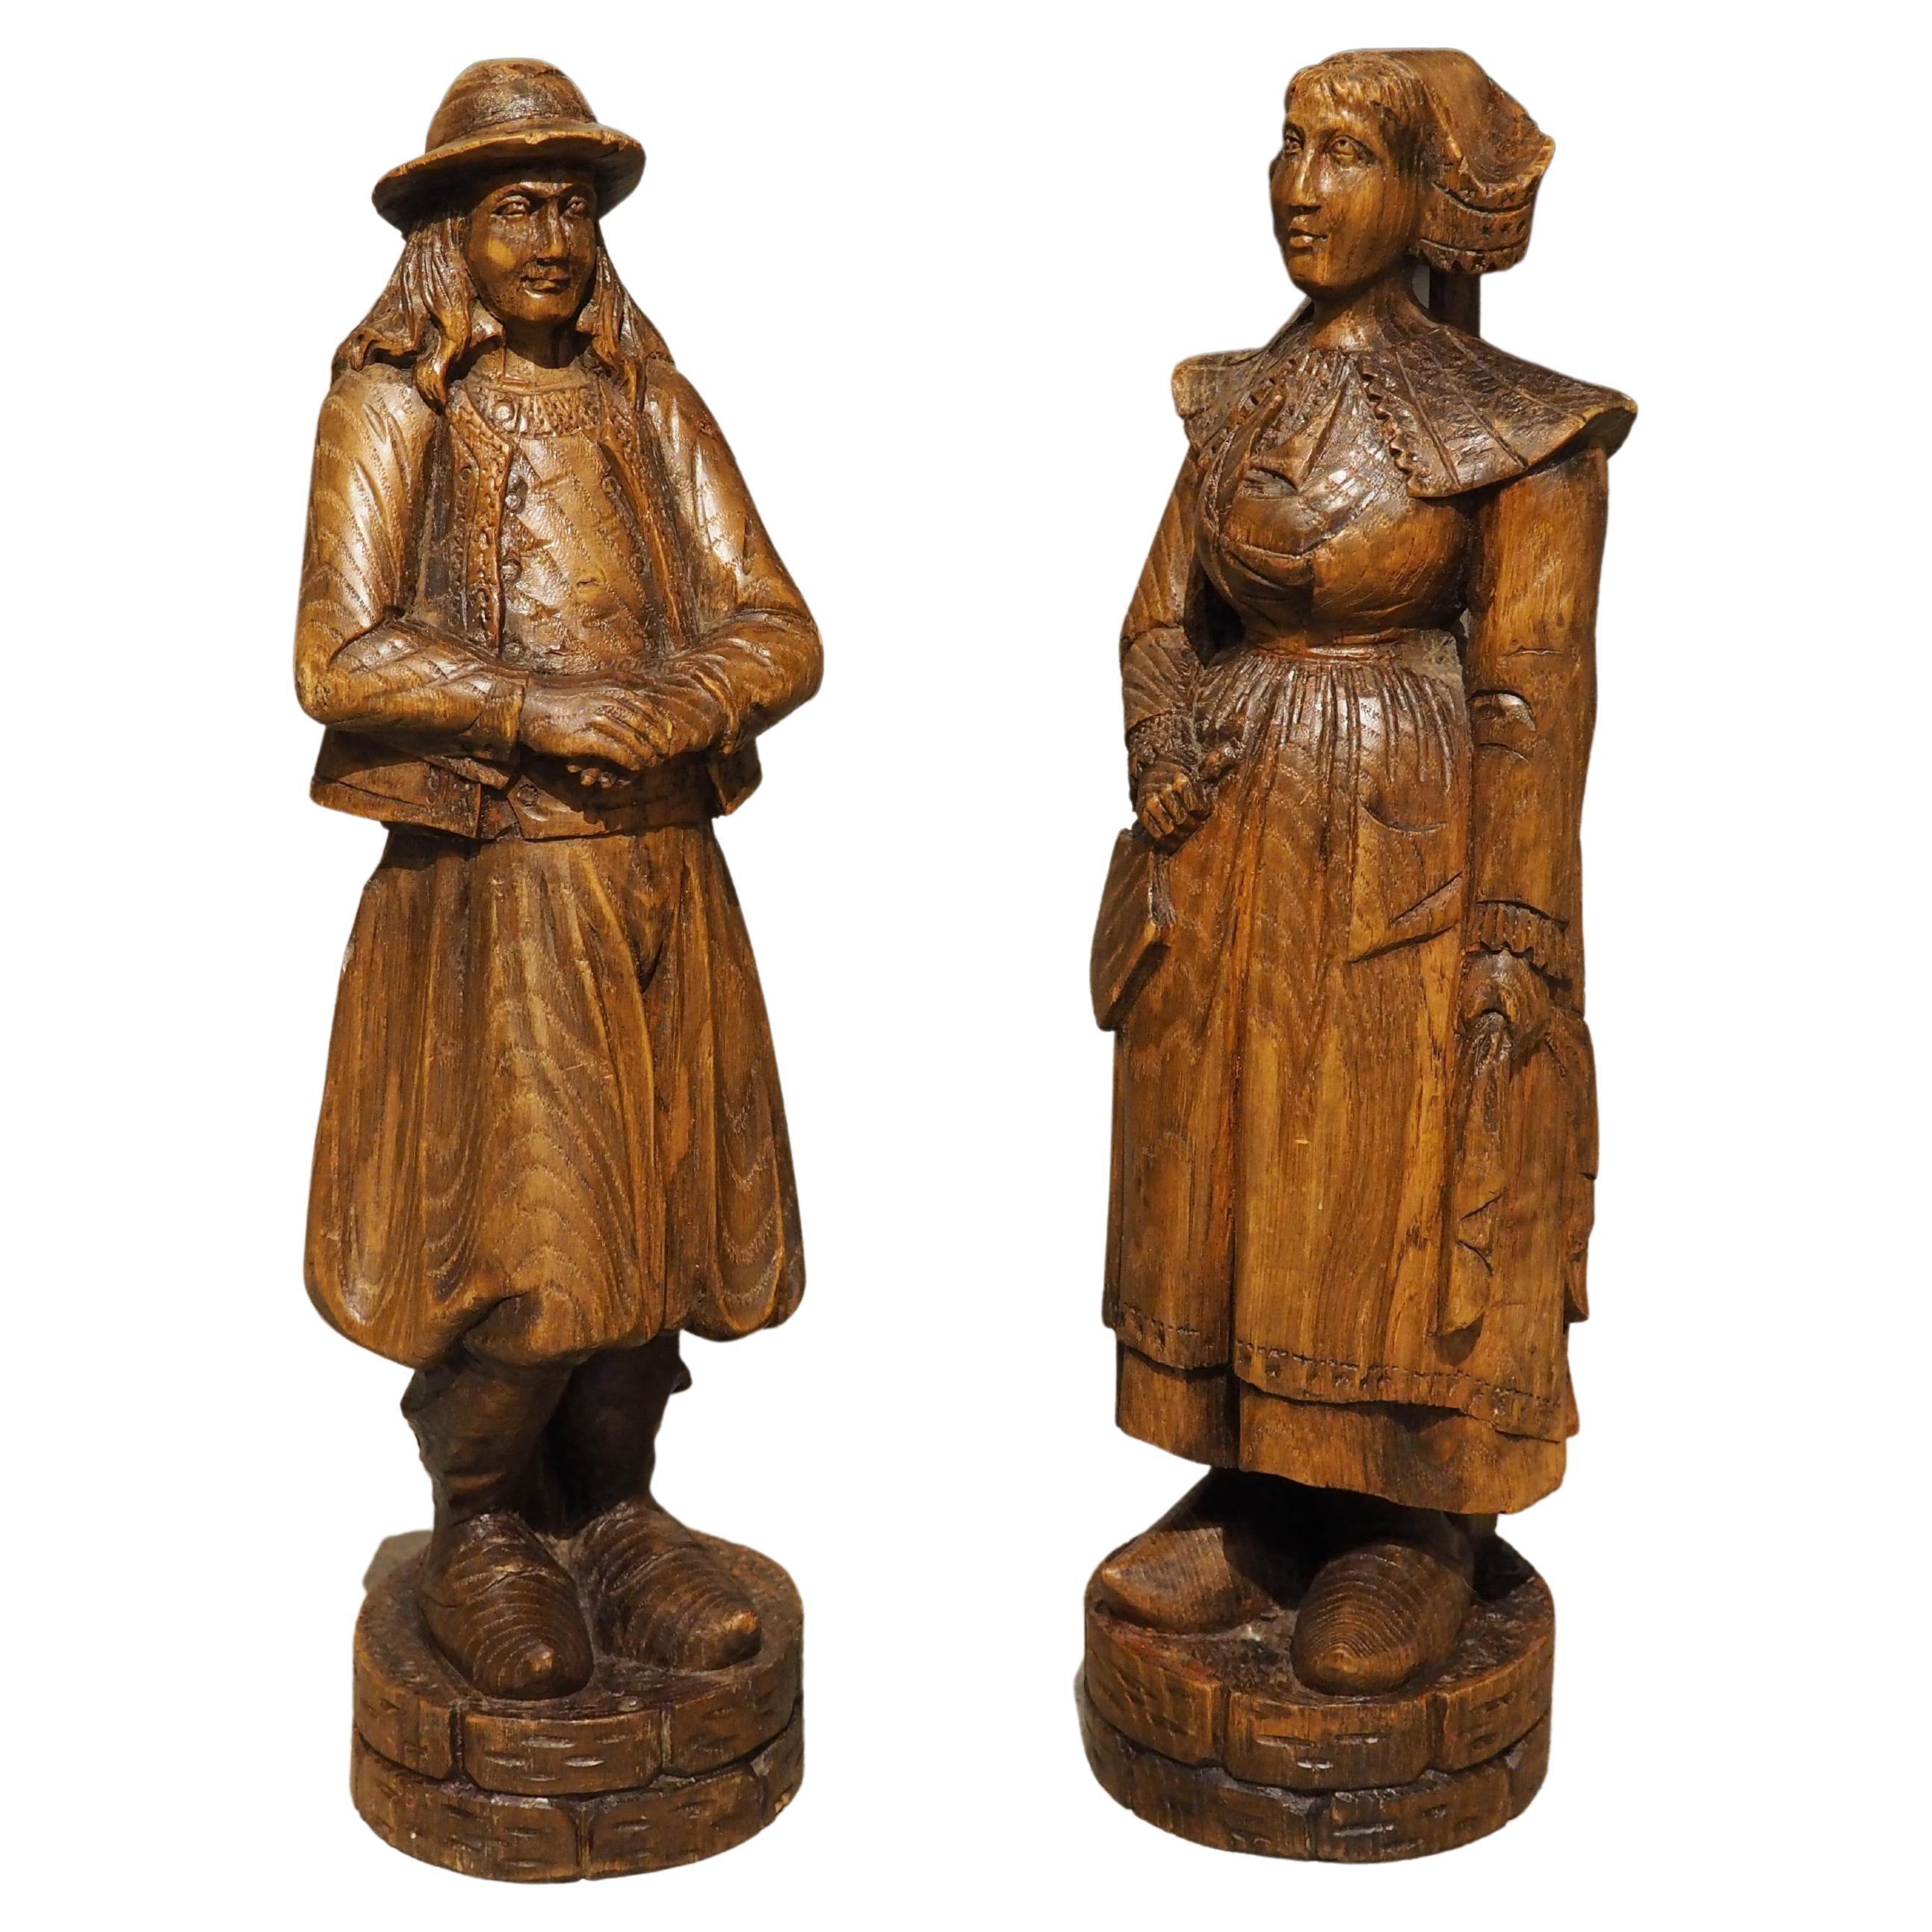 Pair of Carved Antique Breton Figures, Brittany France, Early 1900s